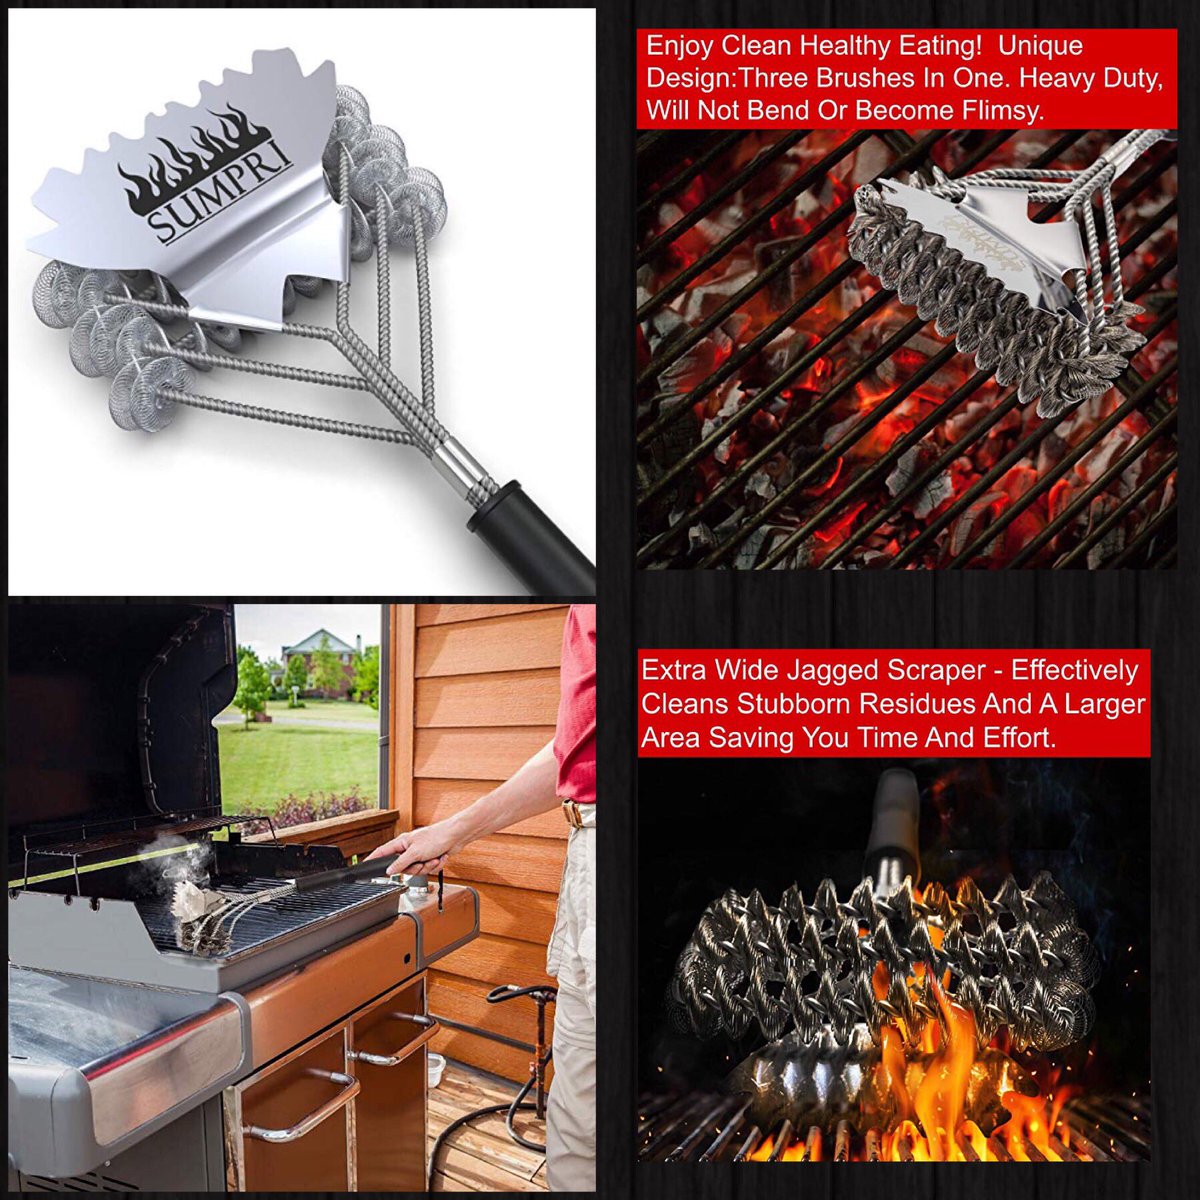 SUMPRI Grill Brush #grill #brush #bristle #free #grillbrush #grillbrushbristlefree #BBQBrush #BBQ
I can’t believe how well this cleans the grill!
amazon.com/s/ref=nb_sb_no…